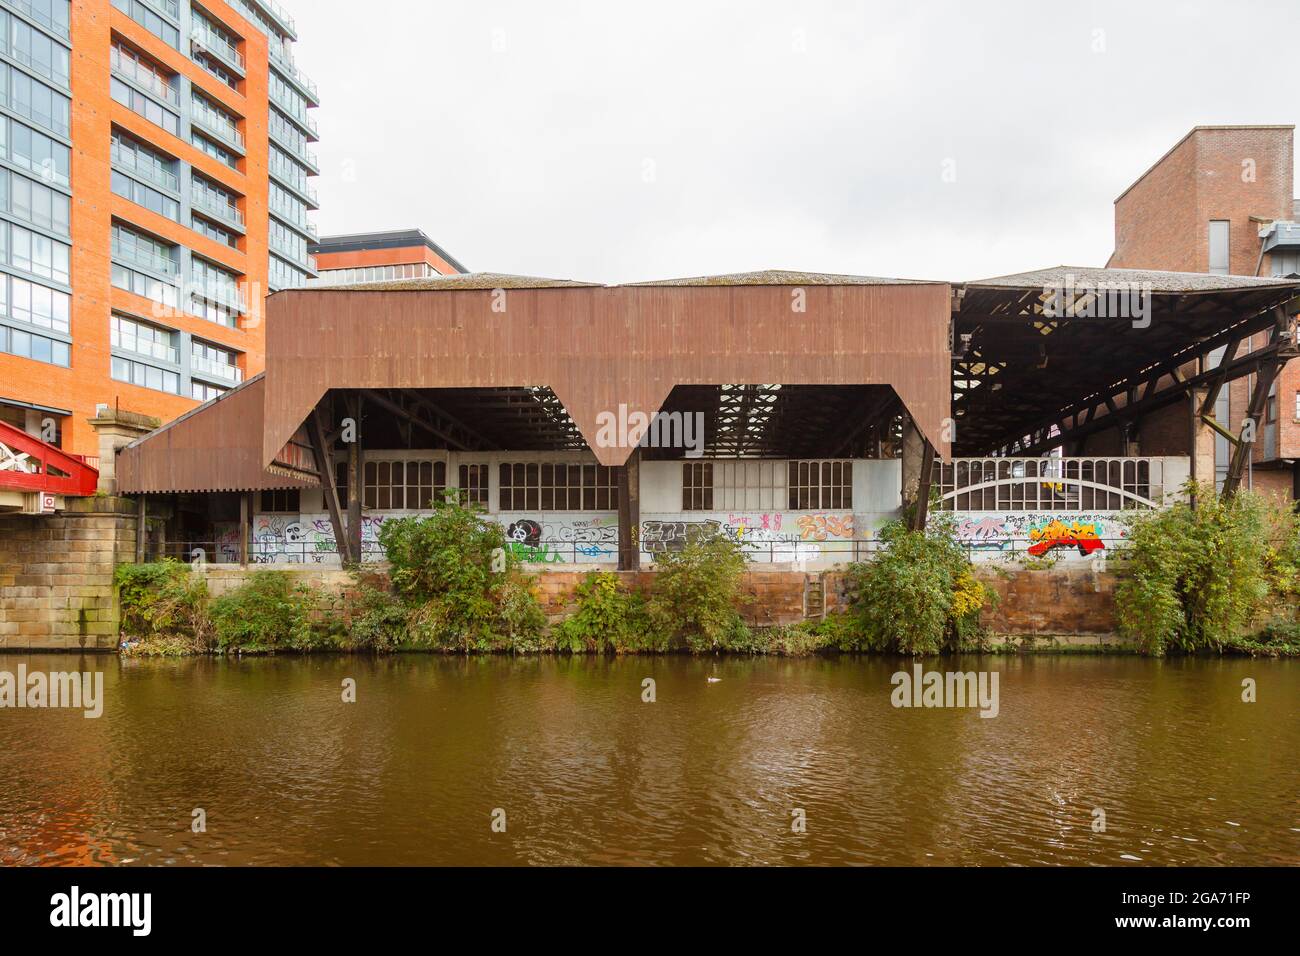 View from the Salford side over the River Irwell of Riverside House, a disused warehouse with graffiti, Spinningfields, Manchester, north-west England Stock Photo